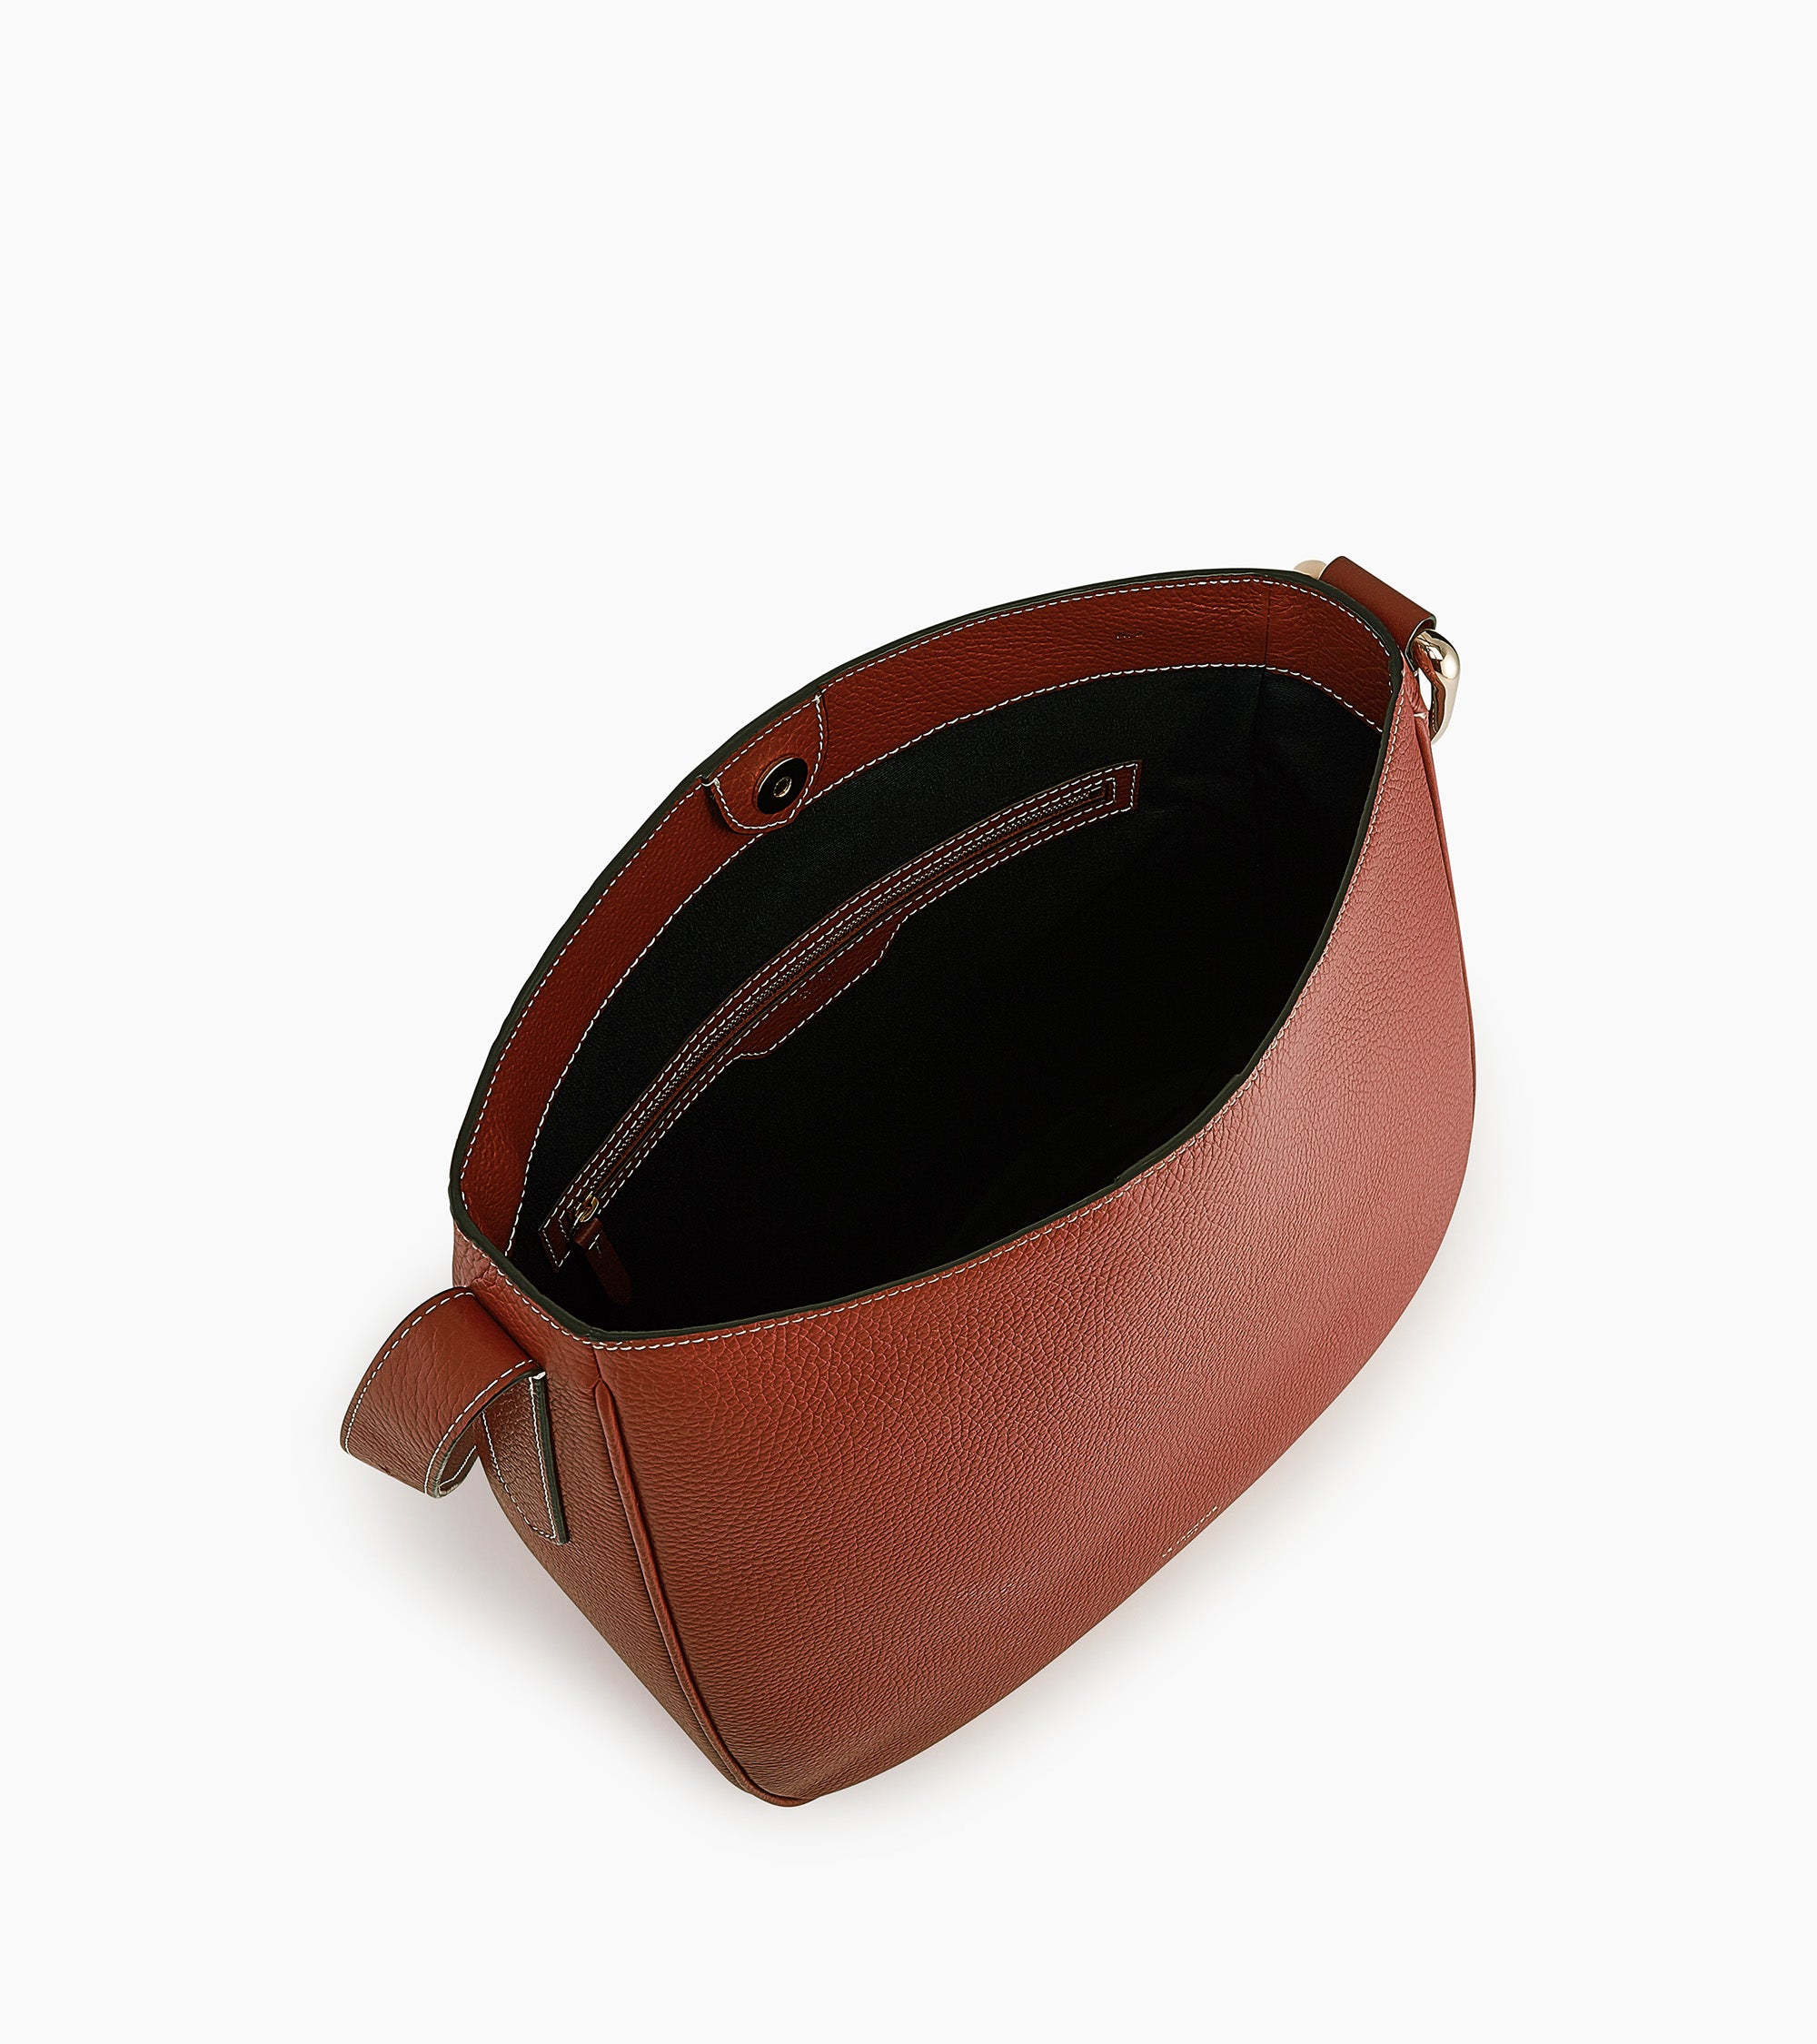 Madeleine large hobo bag in grained leather